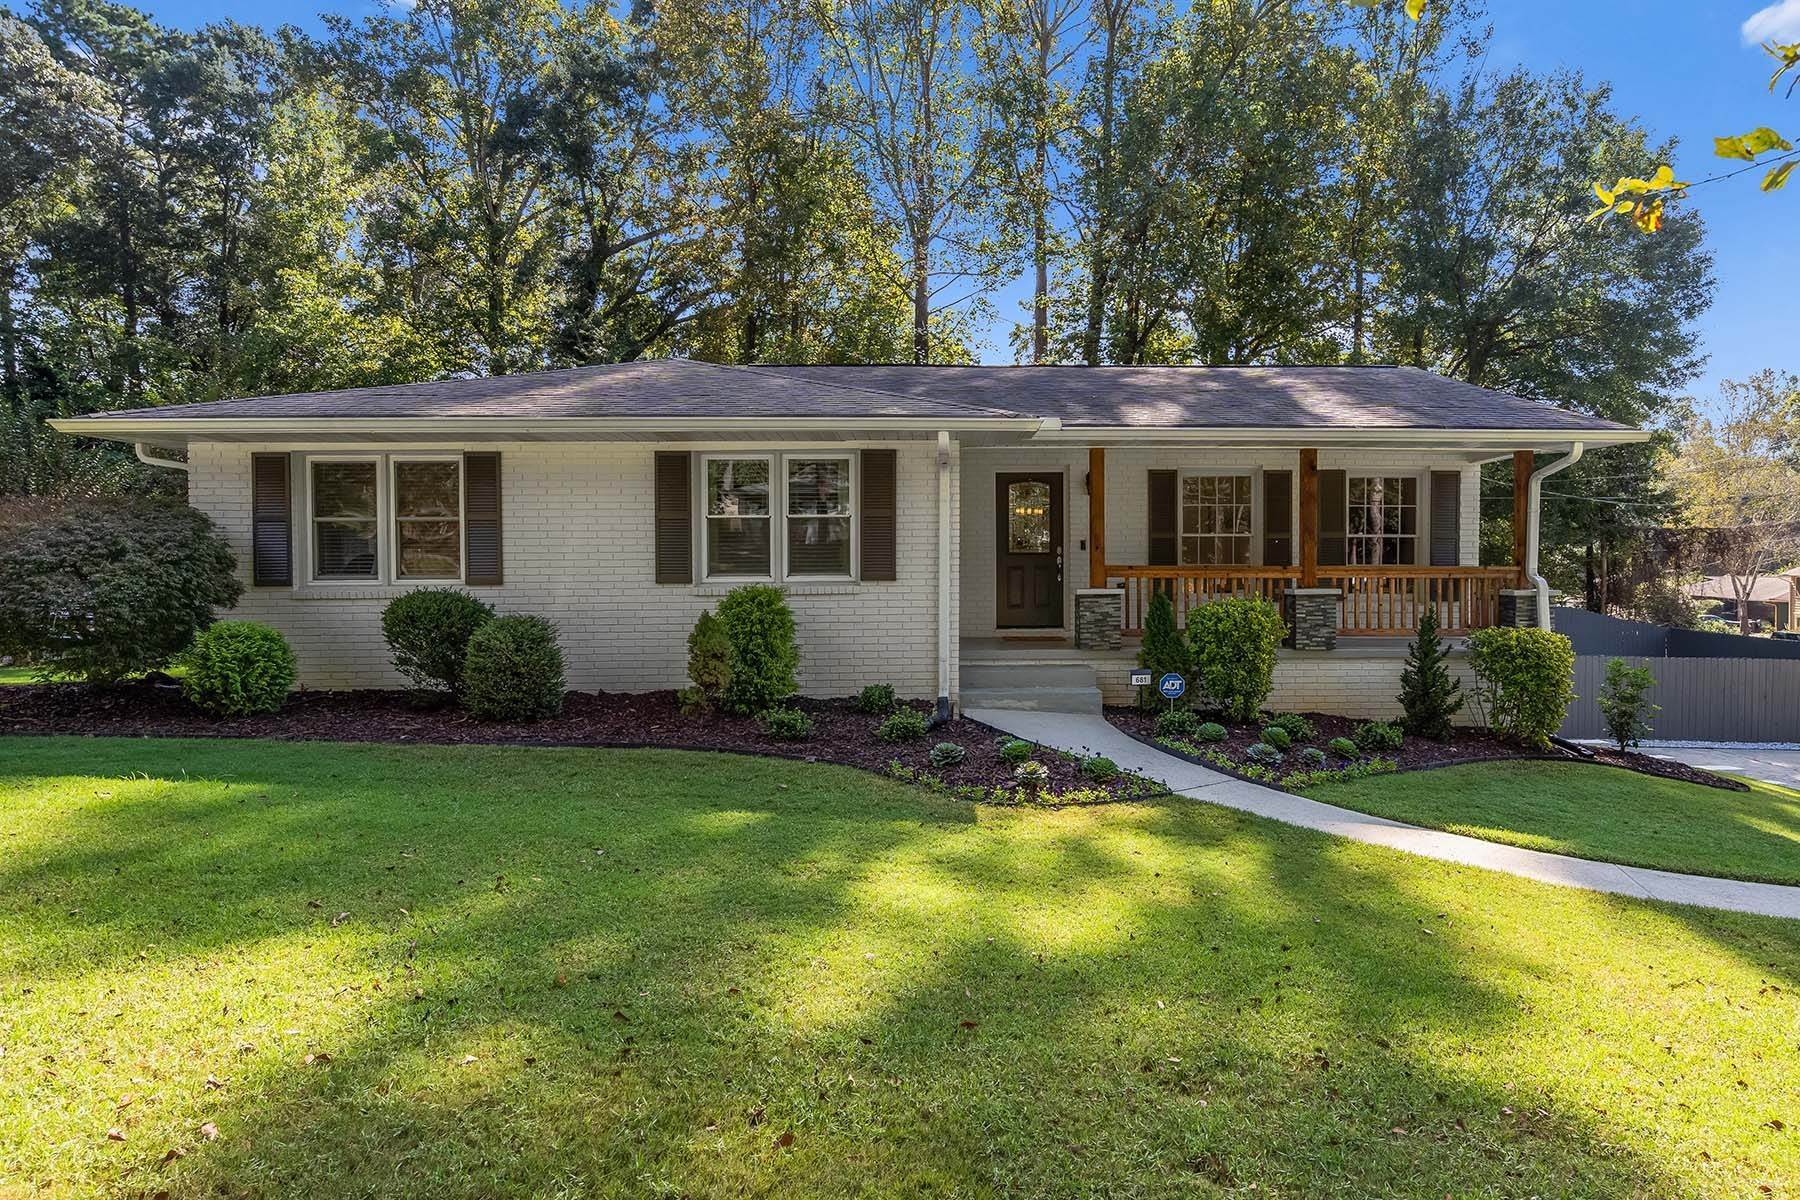 Single Family Homes lúc Mint Condition Well Appointed and Updated Inside and Out 681 Smithstone Court SE Marietta, Georgia 30067 Hoa Kỳ